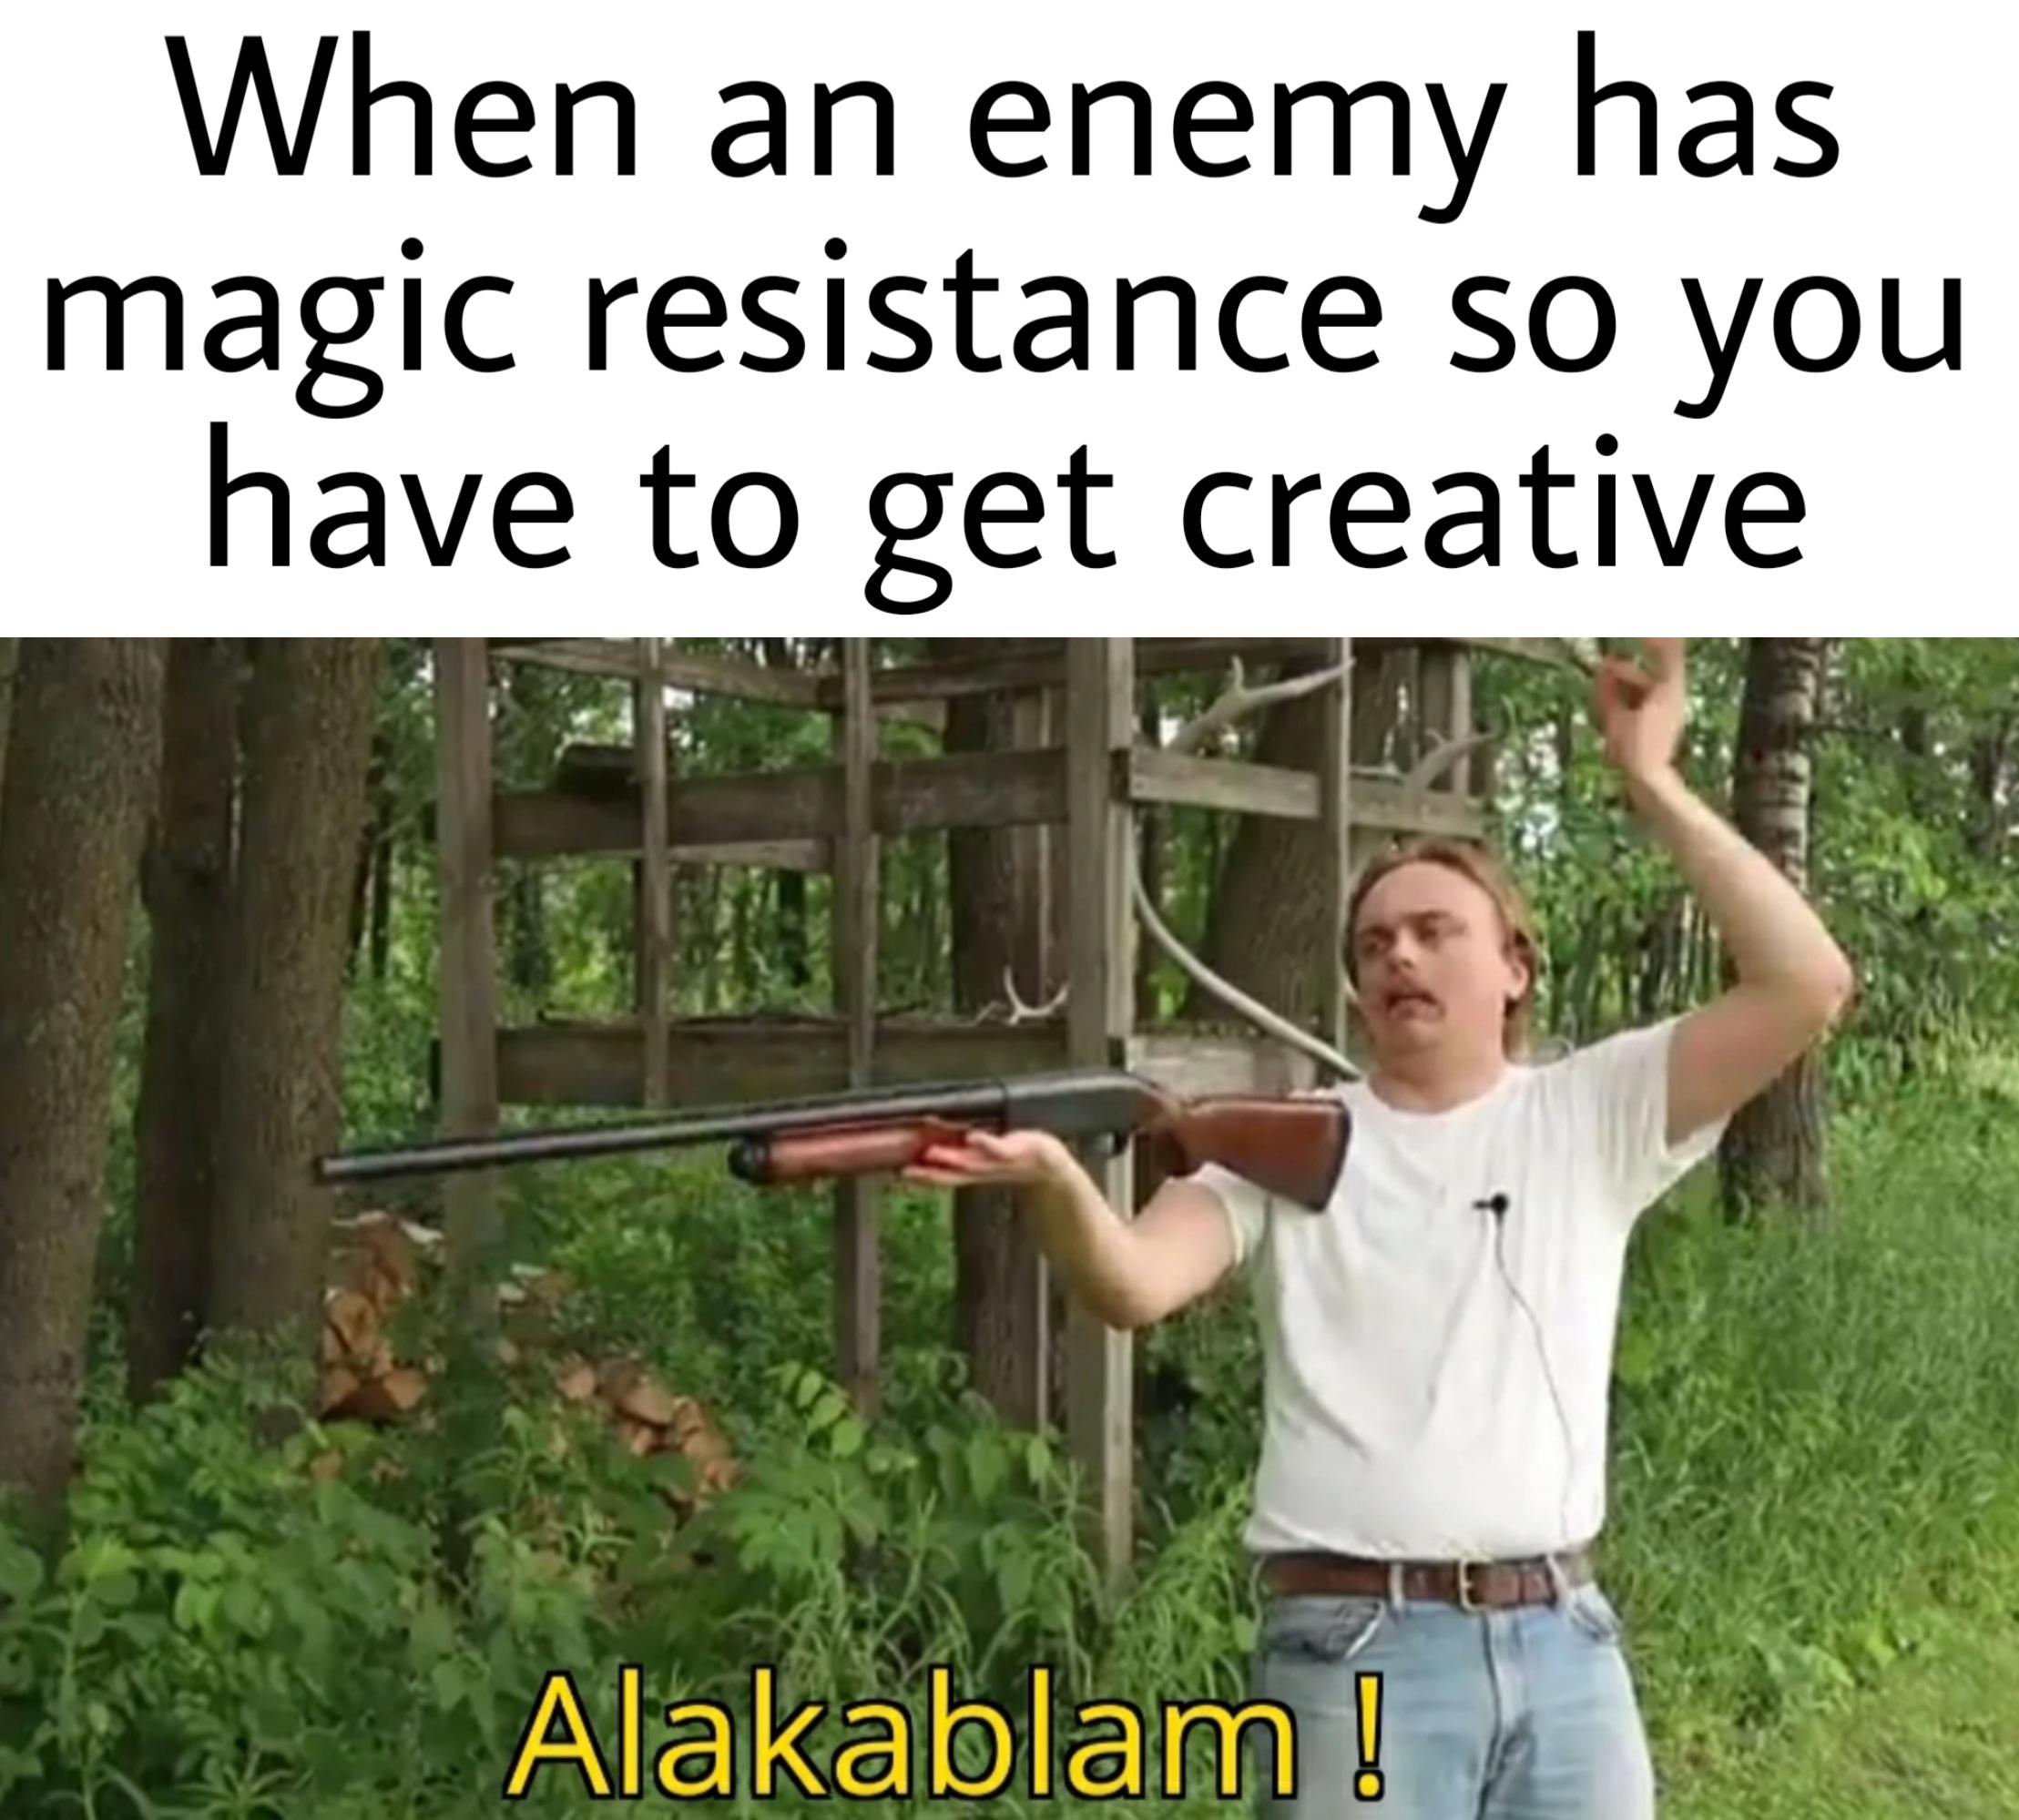 dank memes - tree - When an enemy has magic resistance so you have to get creative Alakablam!